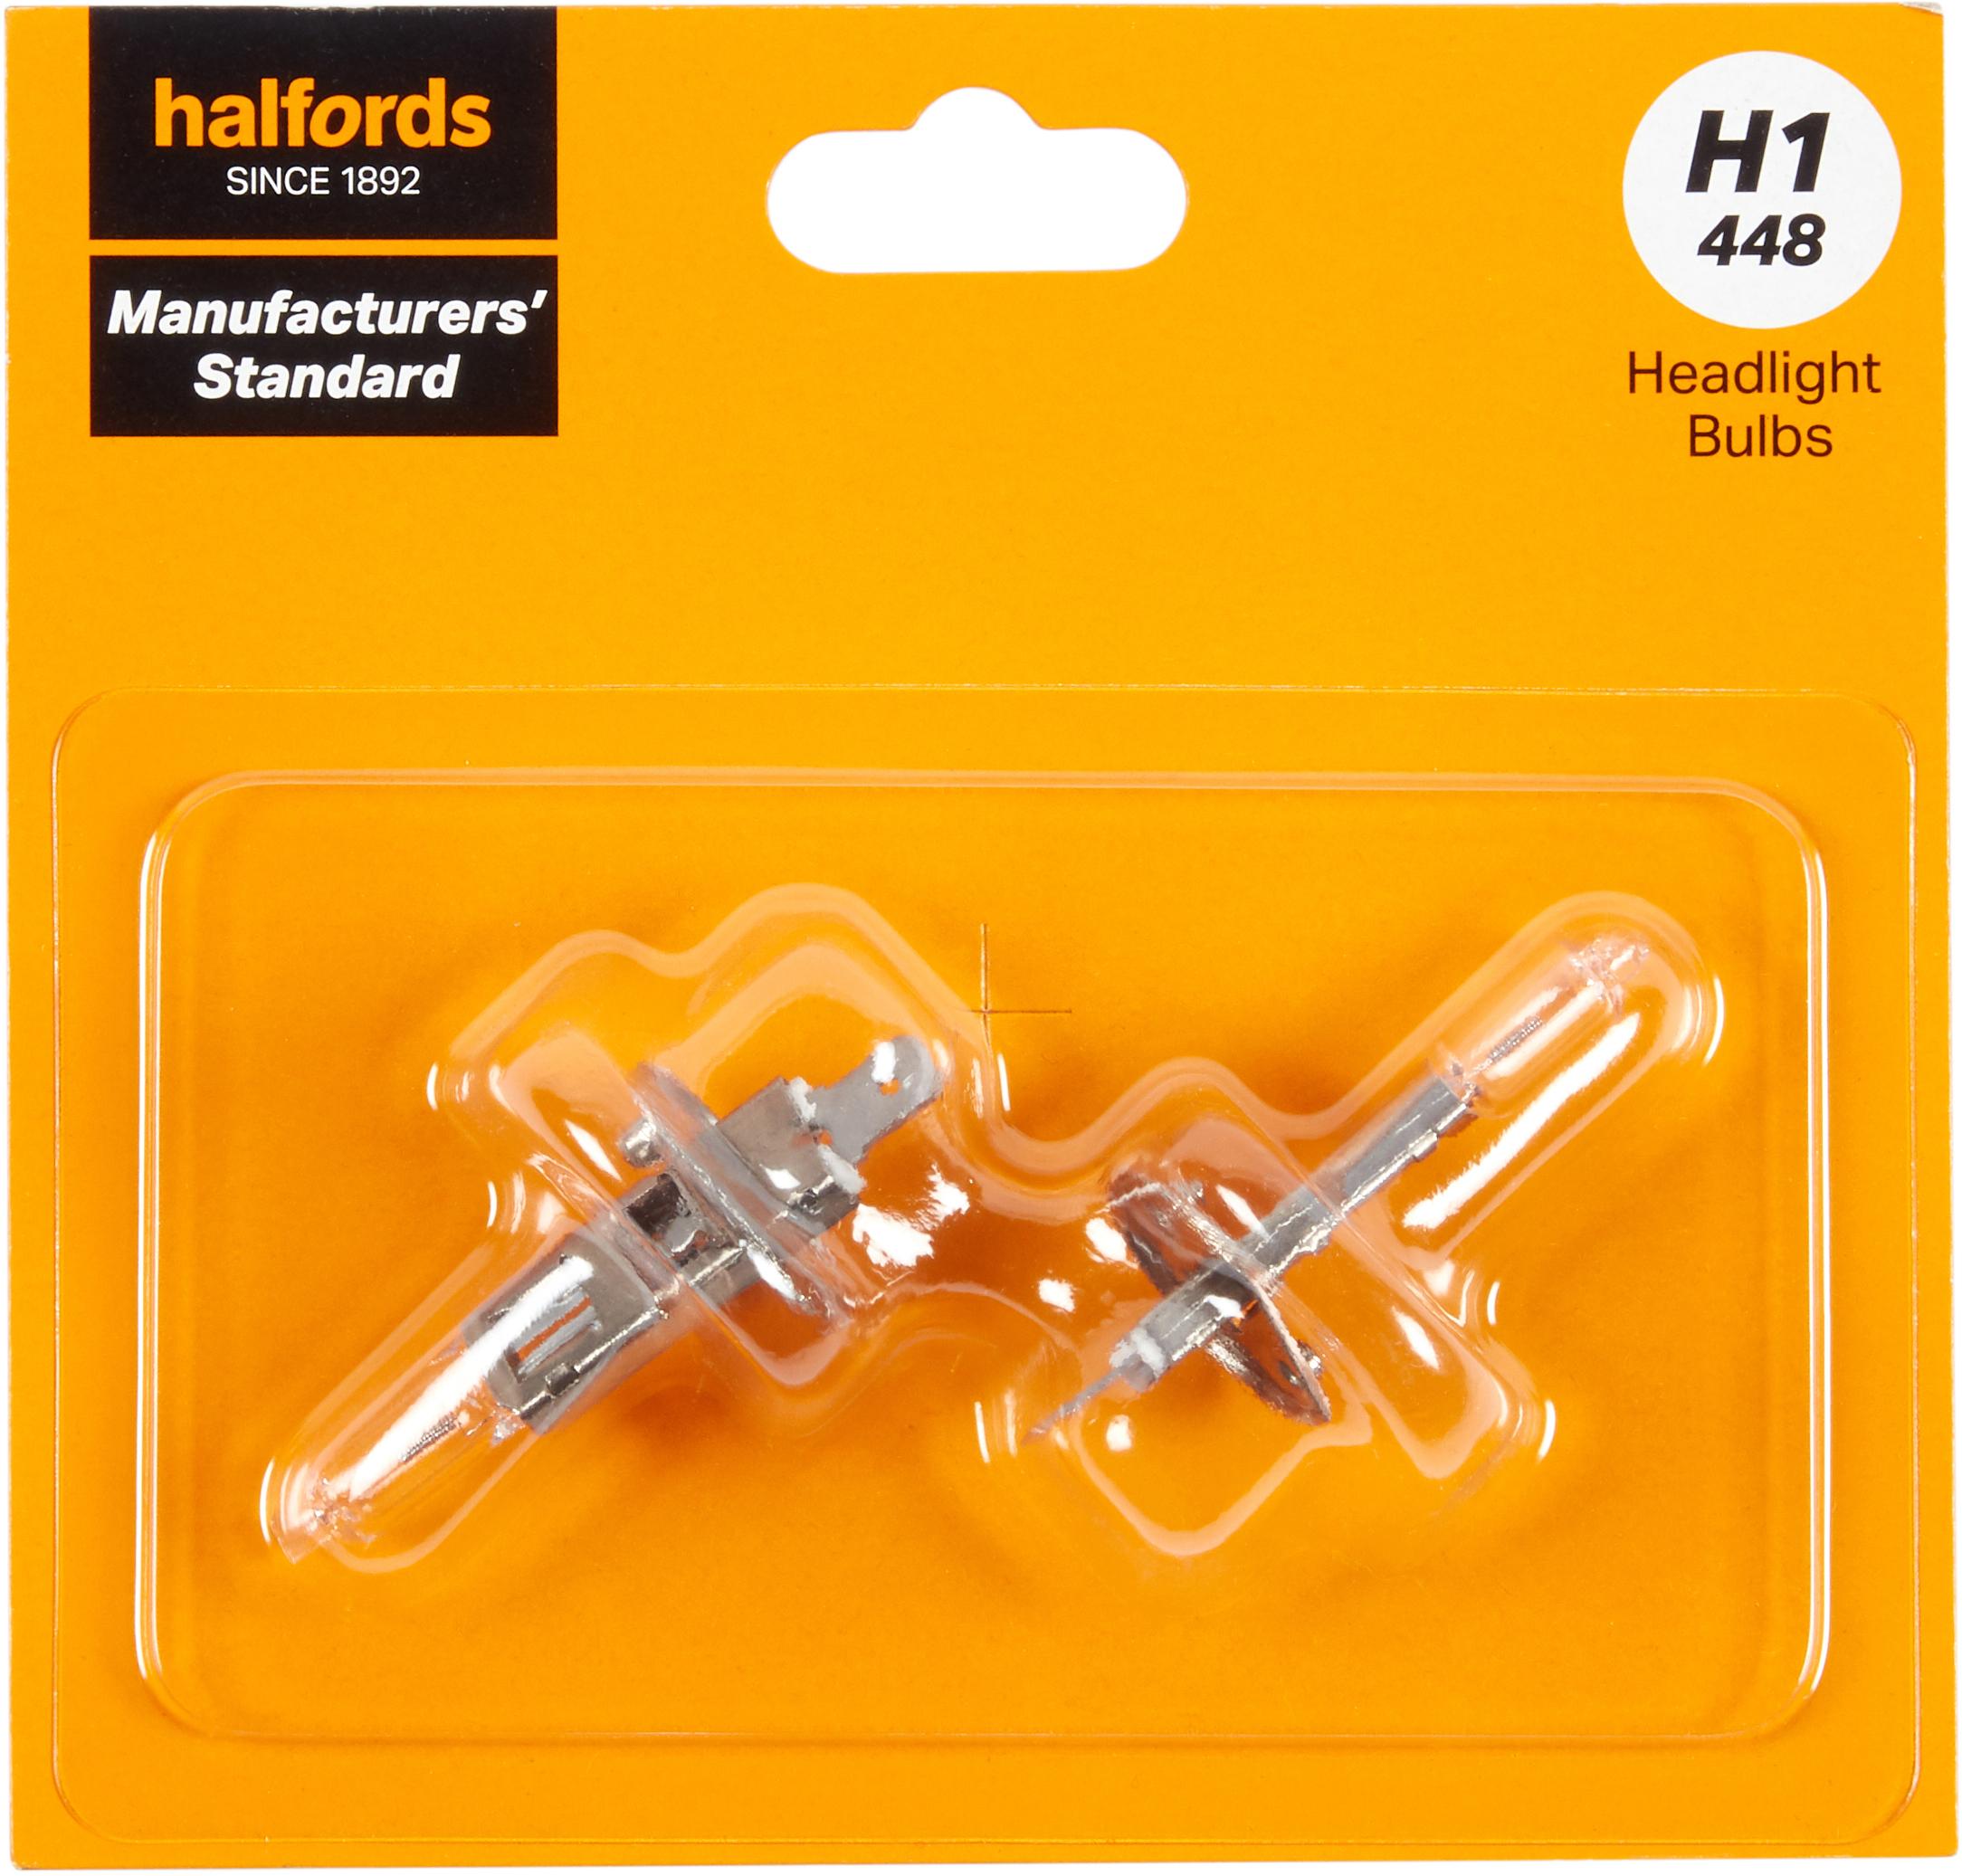 H1 448 Car Headlight Bulb Manufacturers Standard Halfords Twin Pack